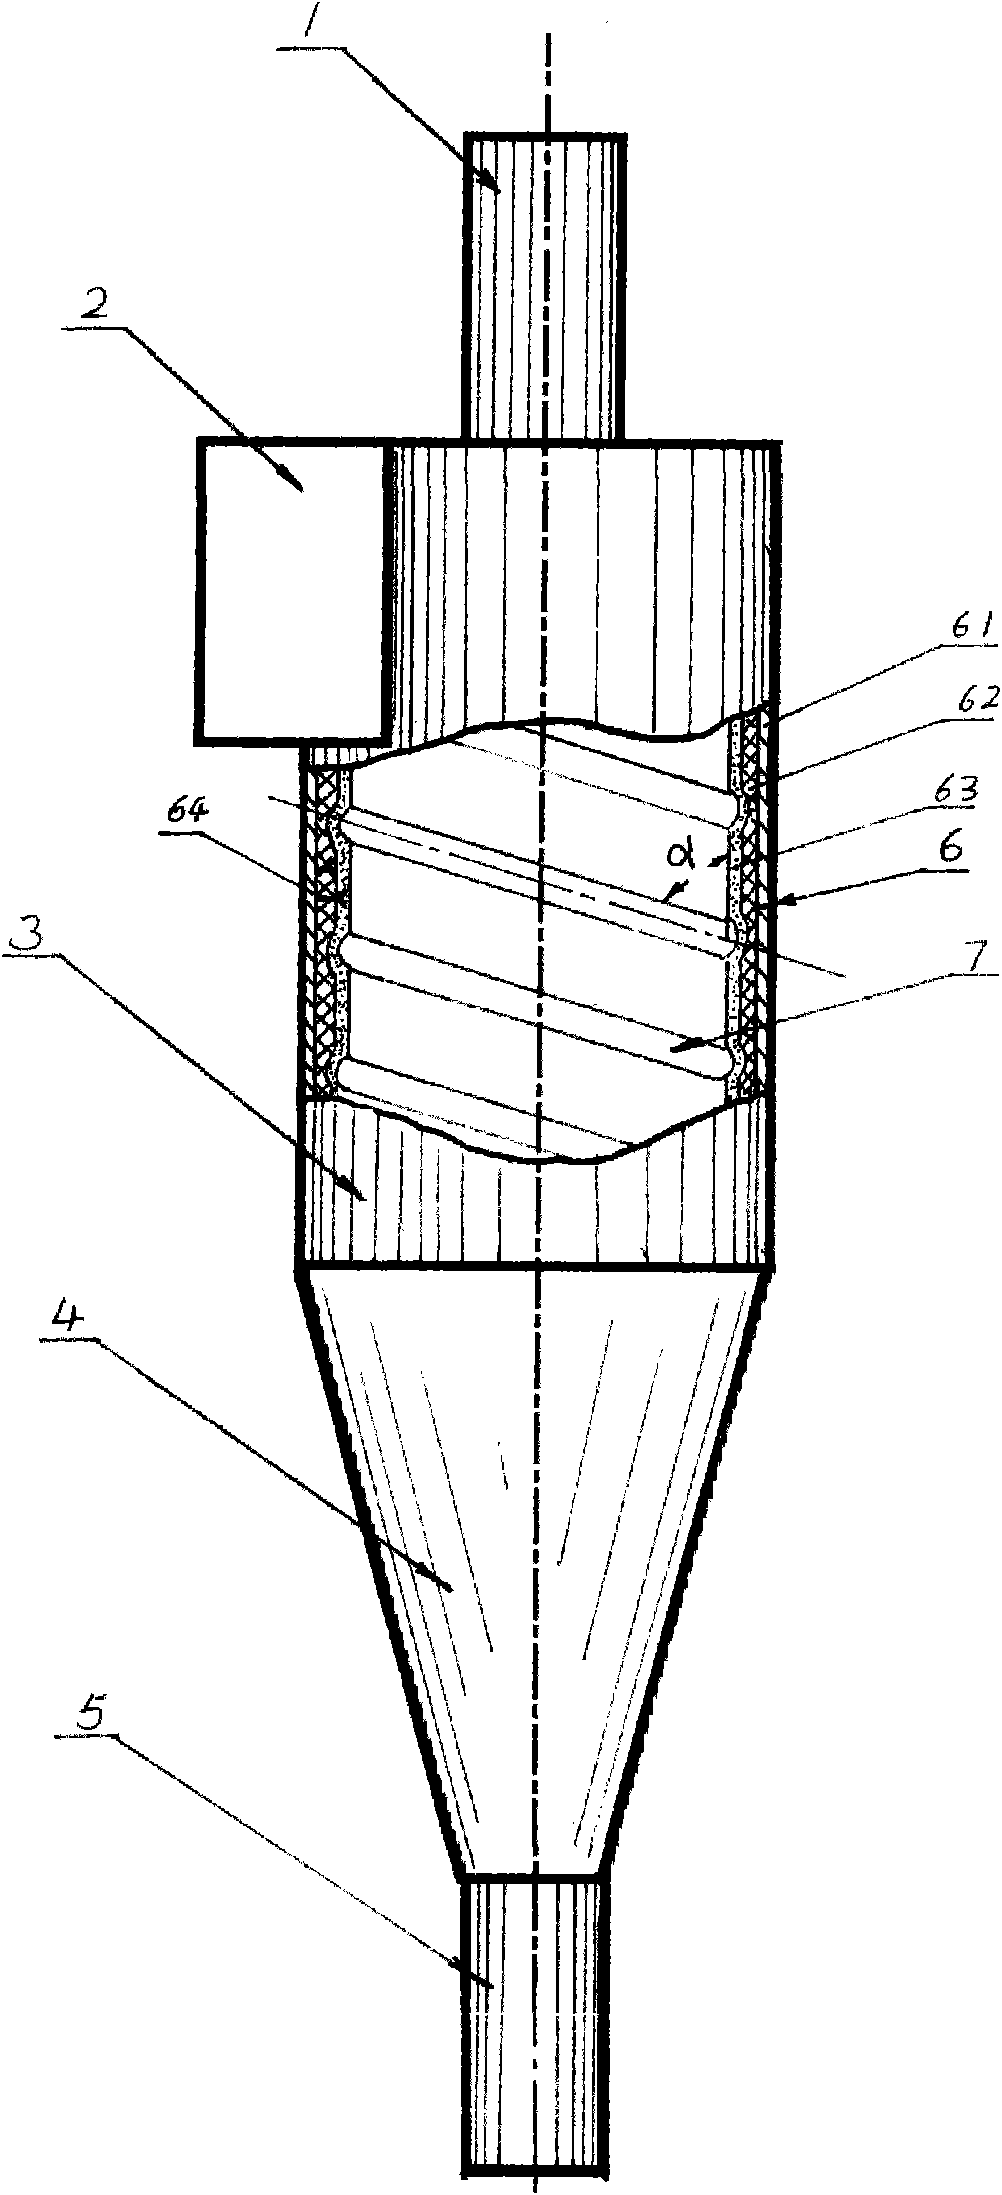 Cyclone separator with grooved wall surface